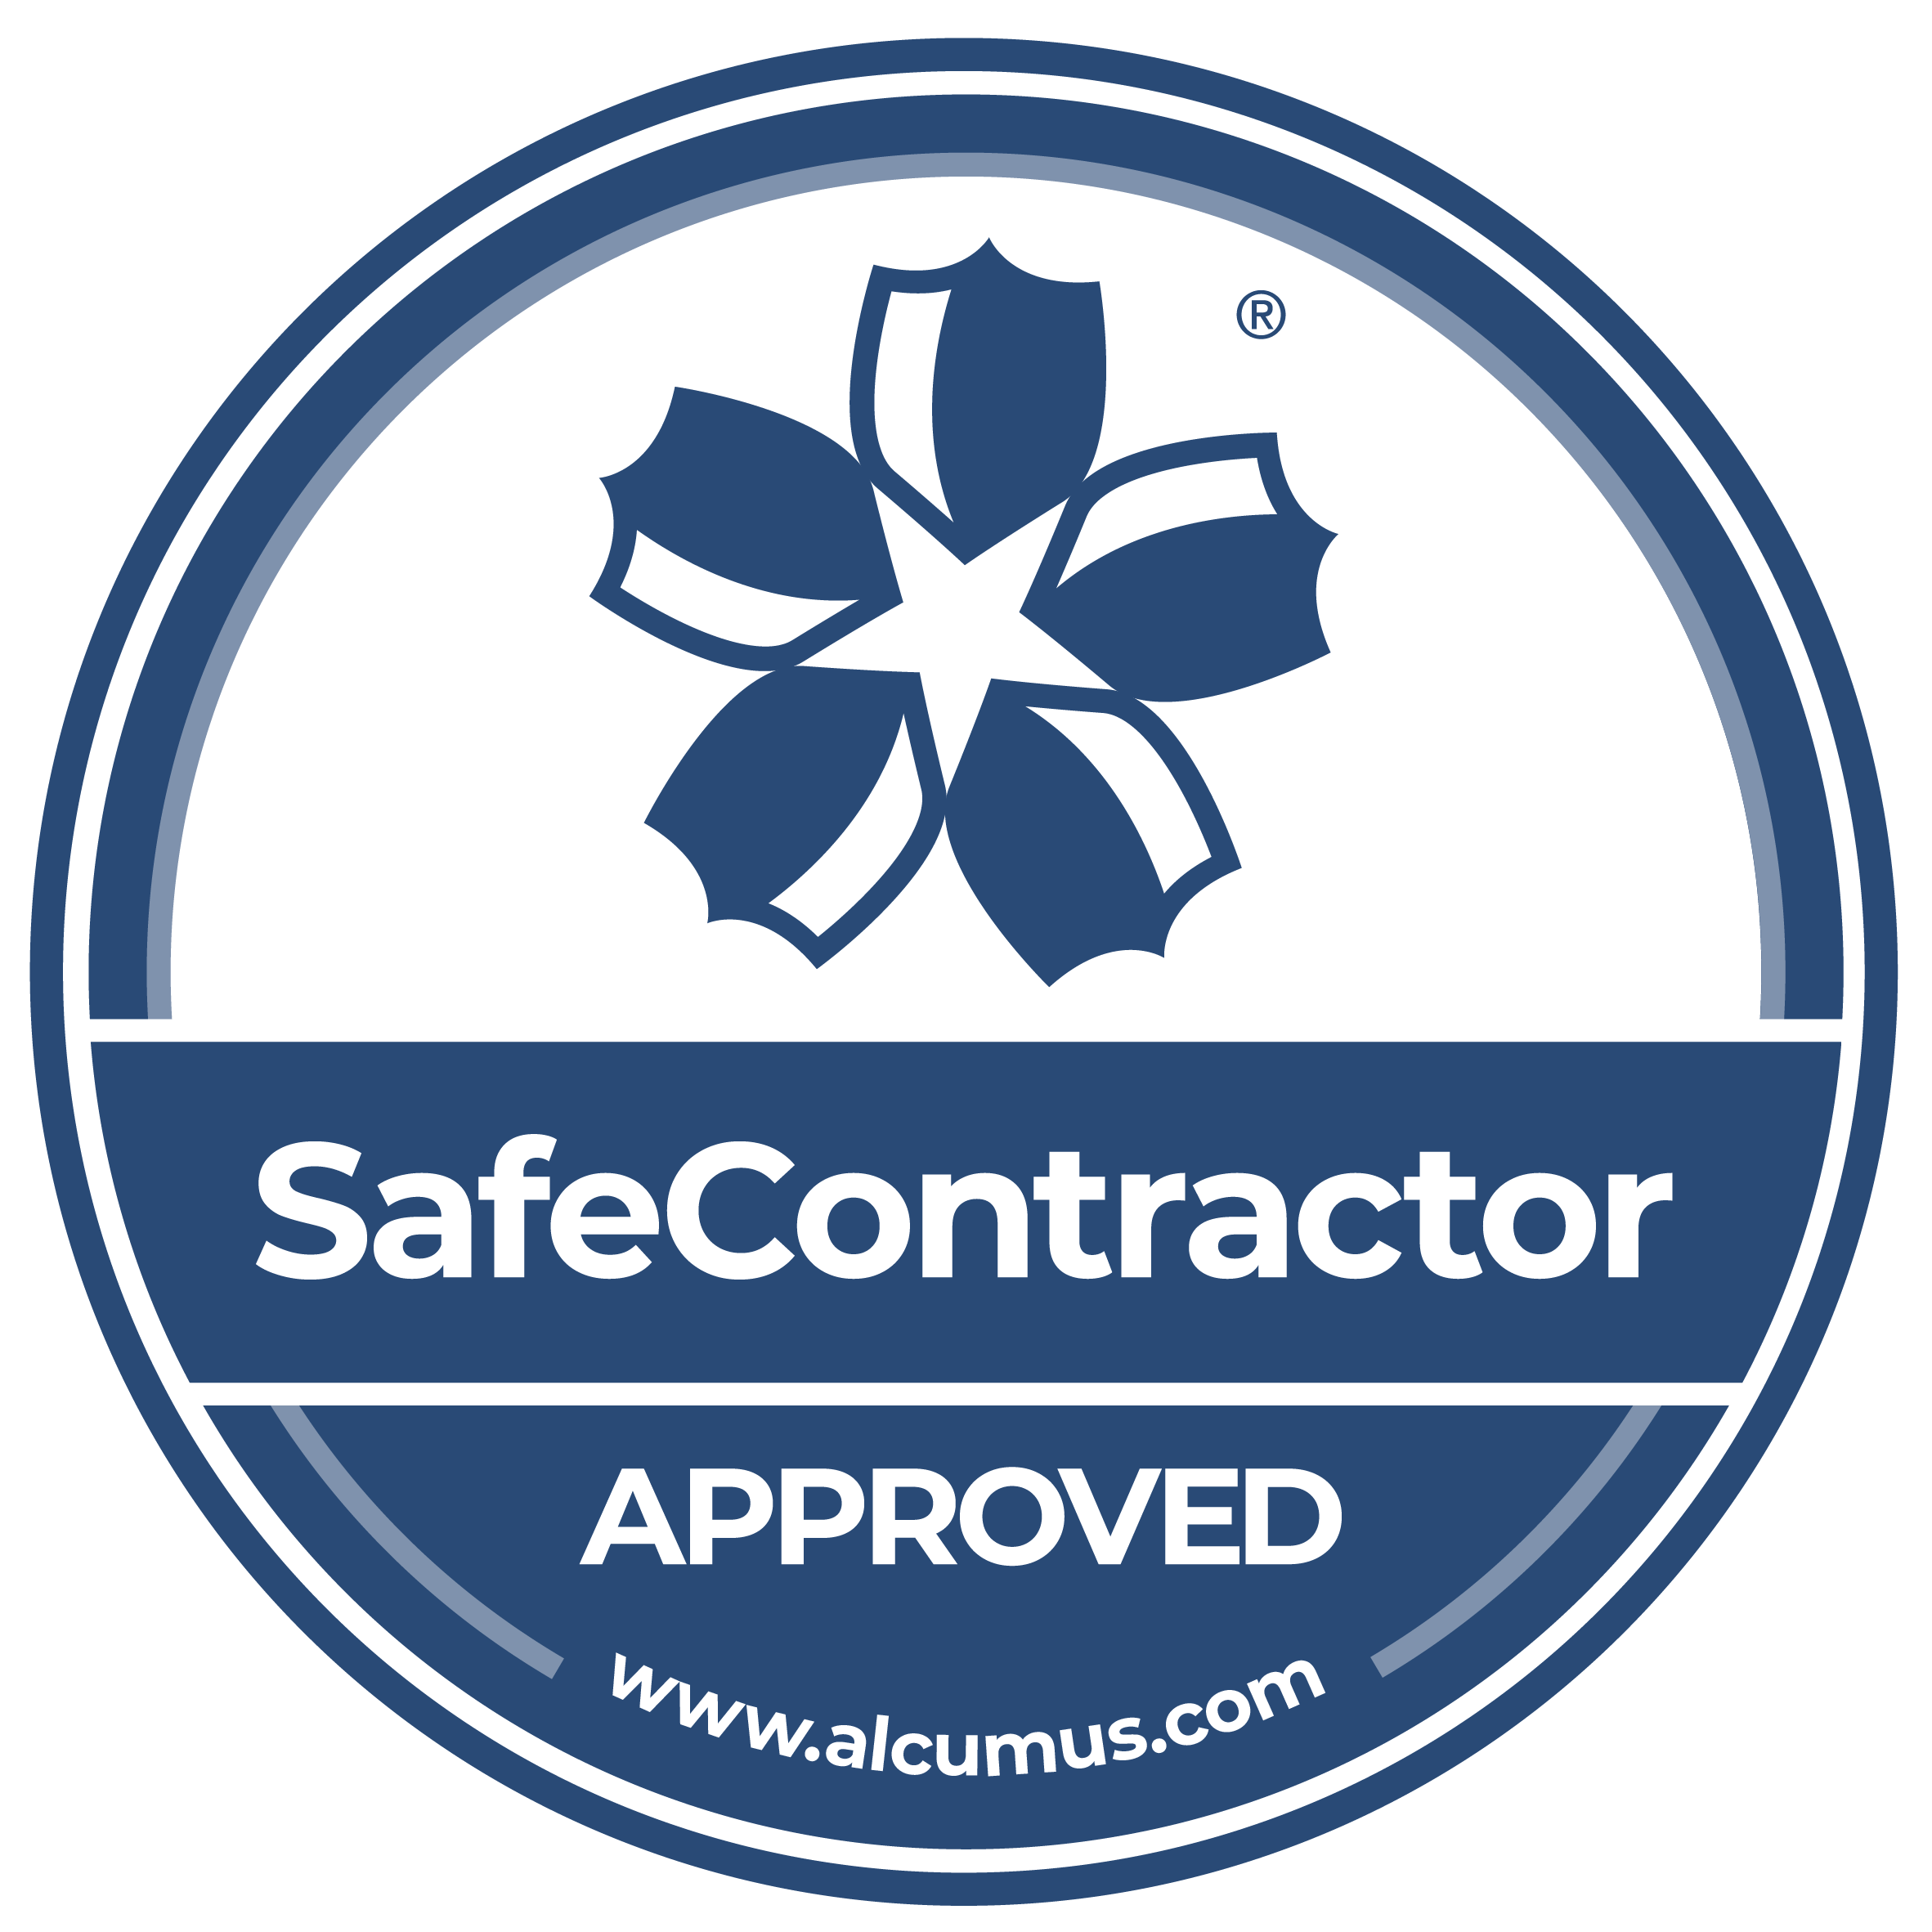 Electorr is an approved Safe Contractor